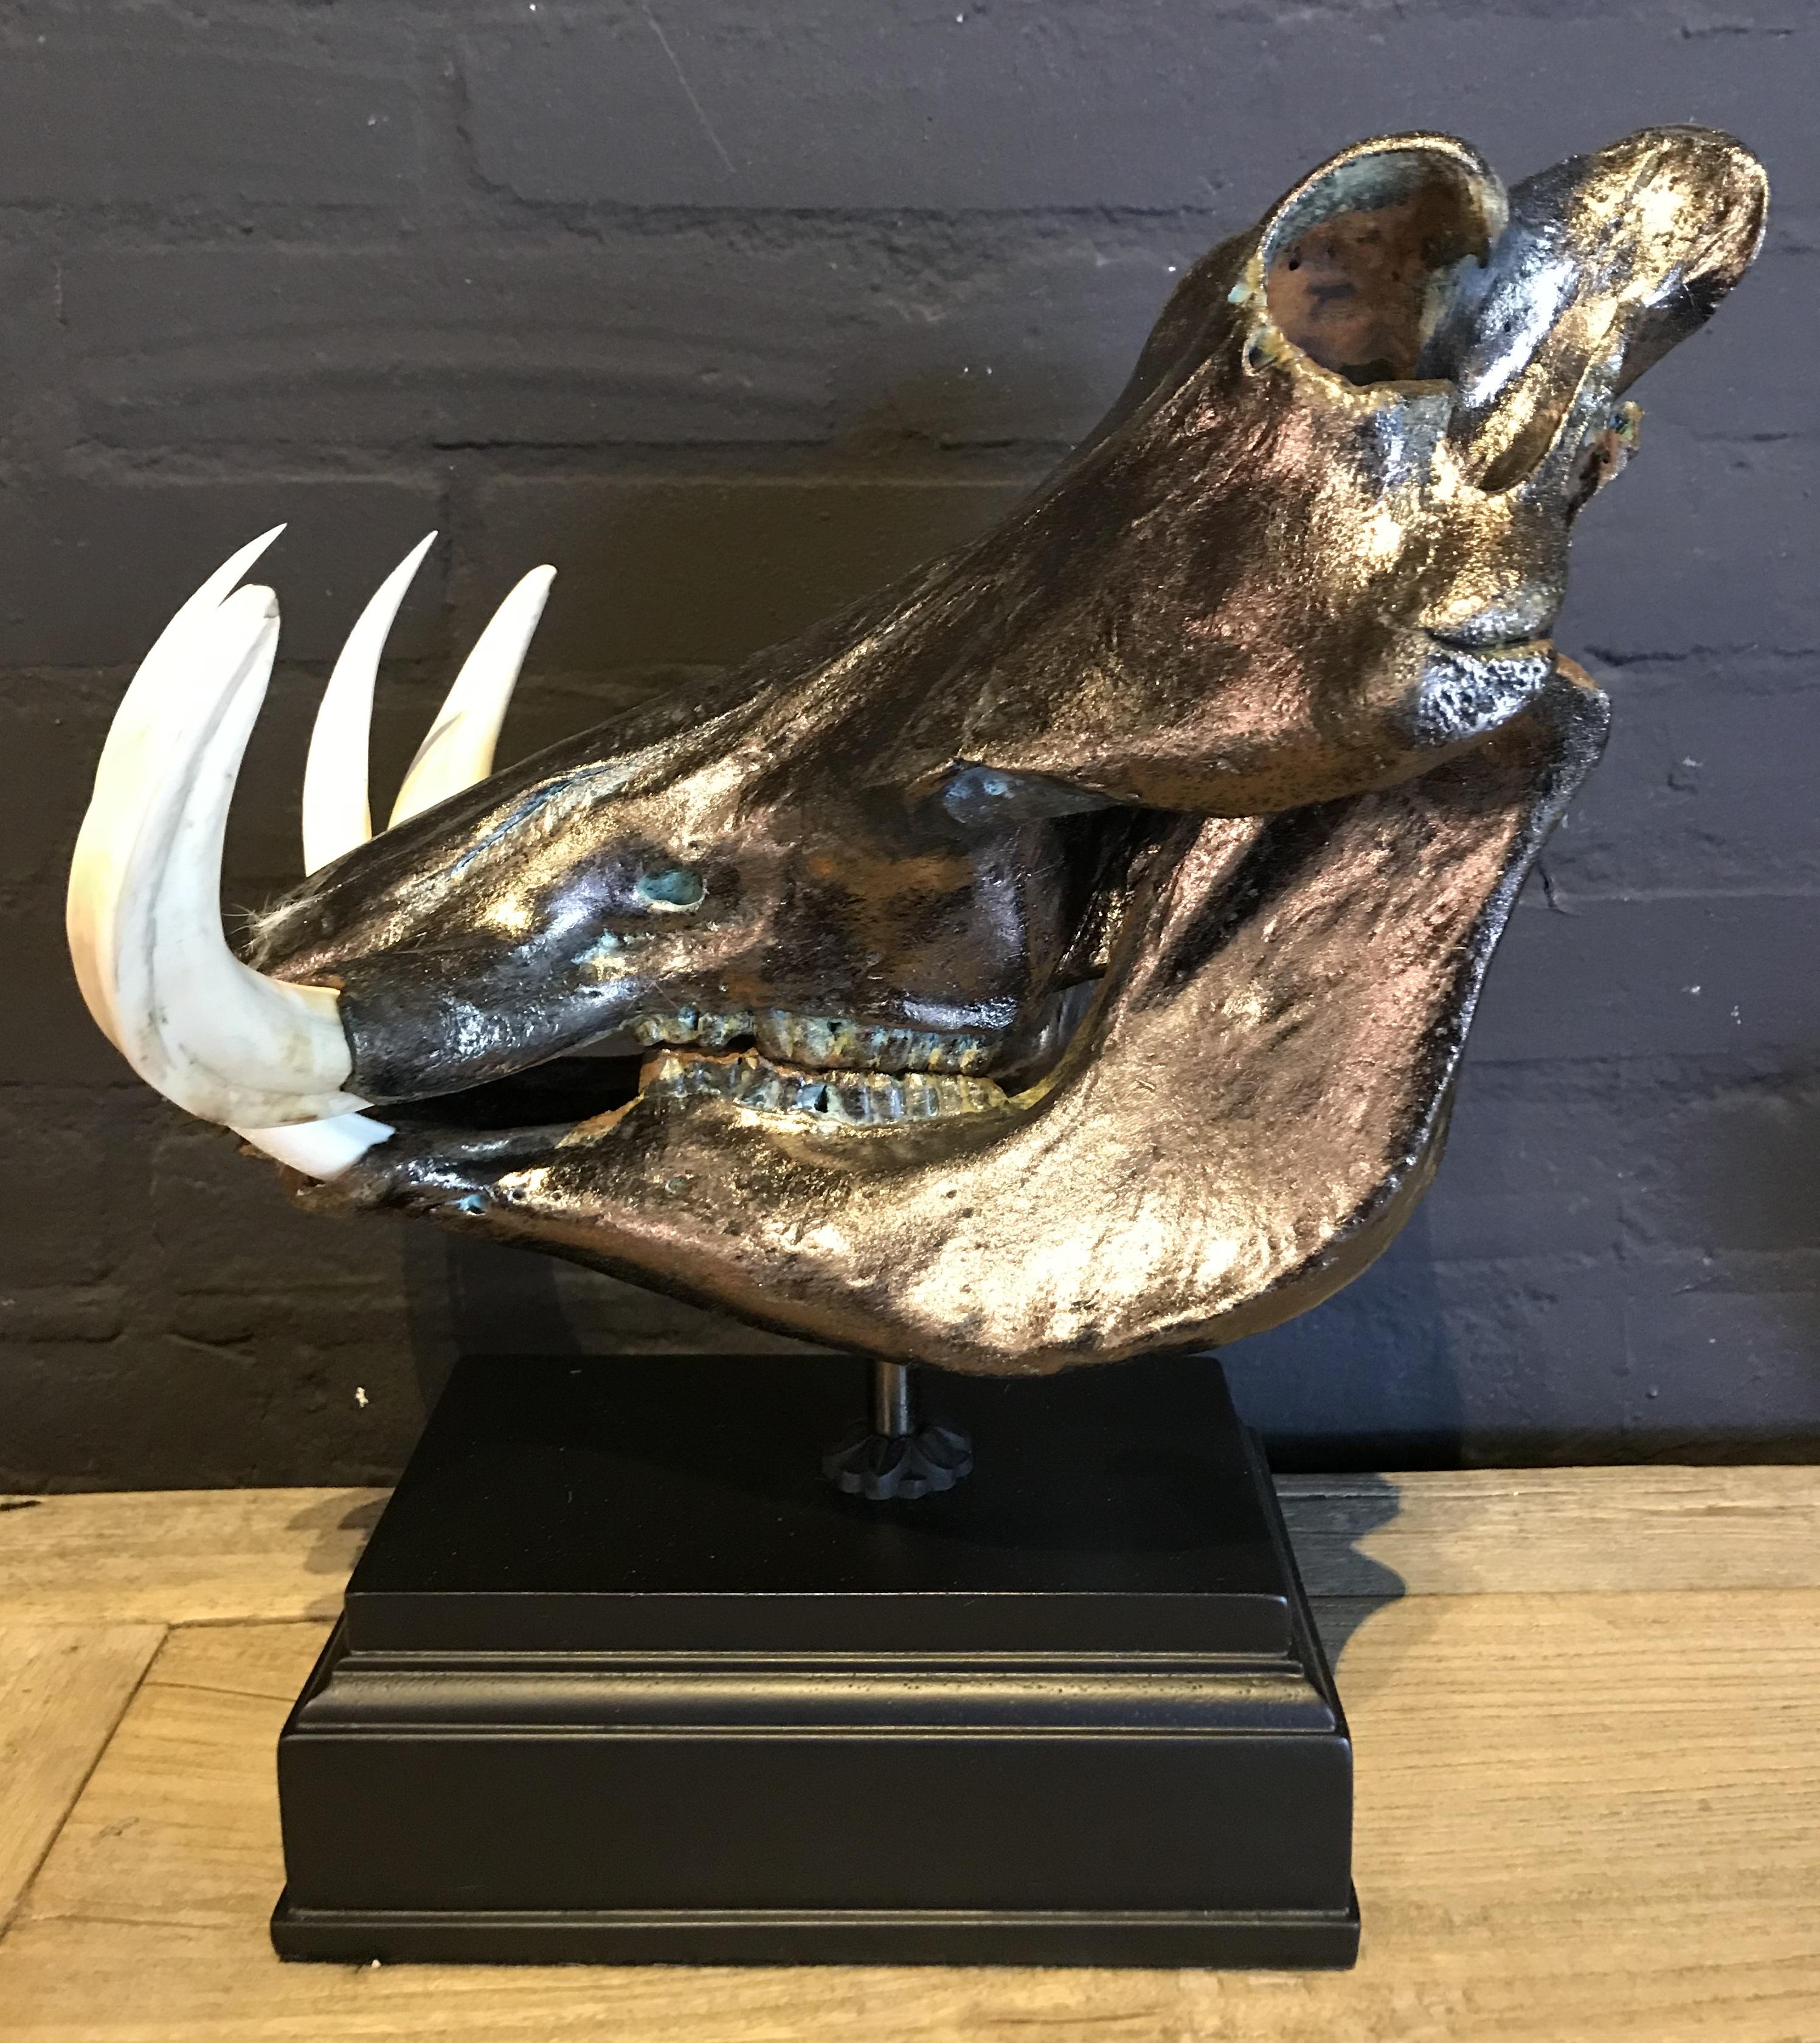 Metalized skull of a warthog. The skull is provided with a real metal layer which has been corroded making it a beautiful patina.
The skull is mounted on a high quality pedestal.